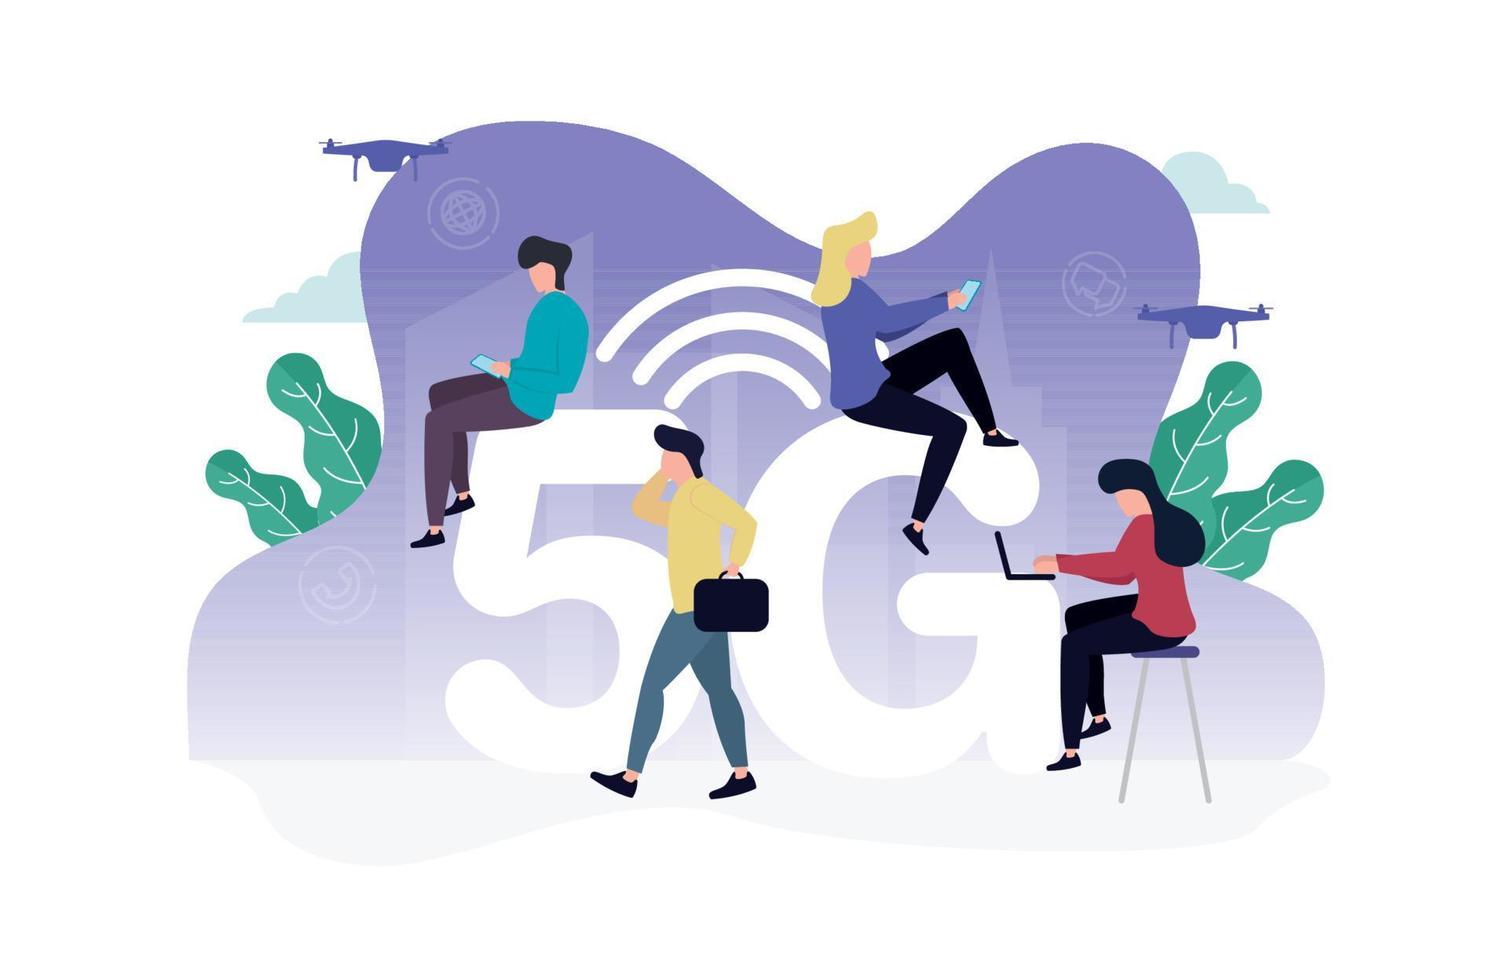 Vector illustration of 5G internet. Women with a laptop, a smartphone are sitting on a stool and the letter G, next to a man with a phone and a briefcase in their hands, quadcopters in the background.